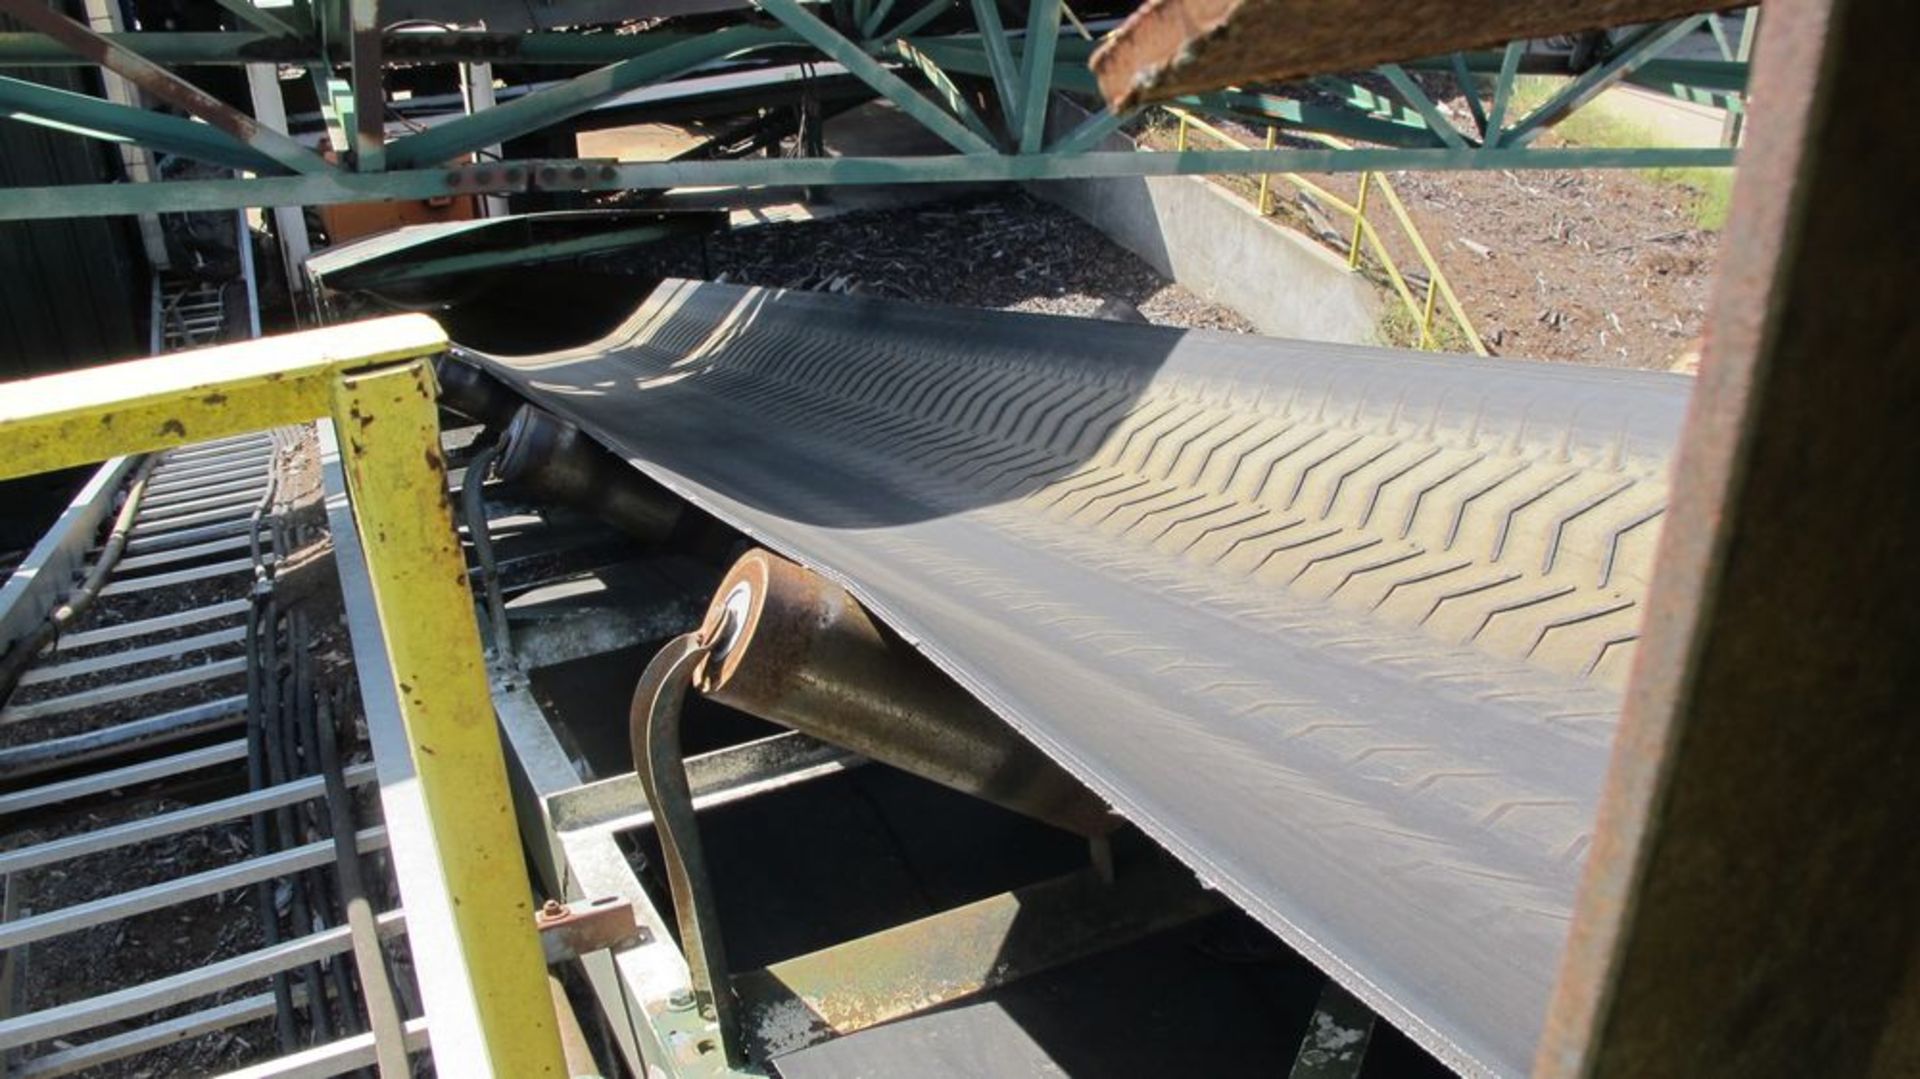 APPROX 53'L INCLINE TROUGH RUBBER BELT (41"W) CONVEYOR W/40HP MOTOR/DRIVE AND ELECTRICAL CALES/ - Image 7 of 7